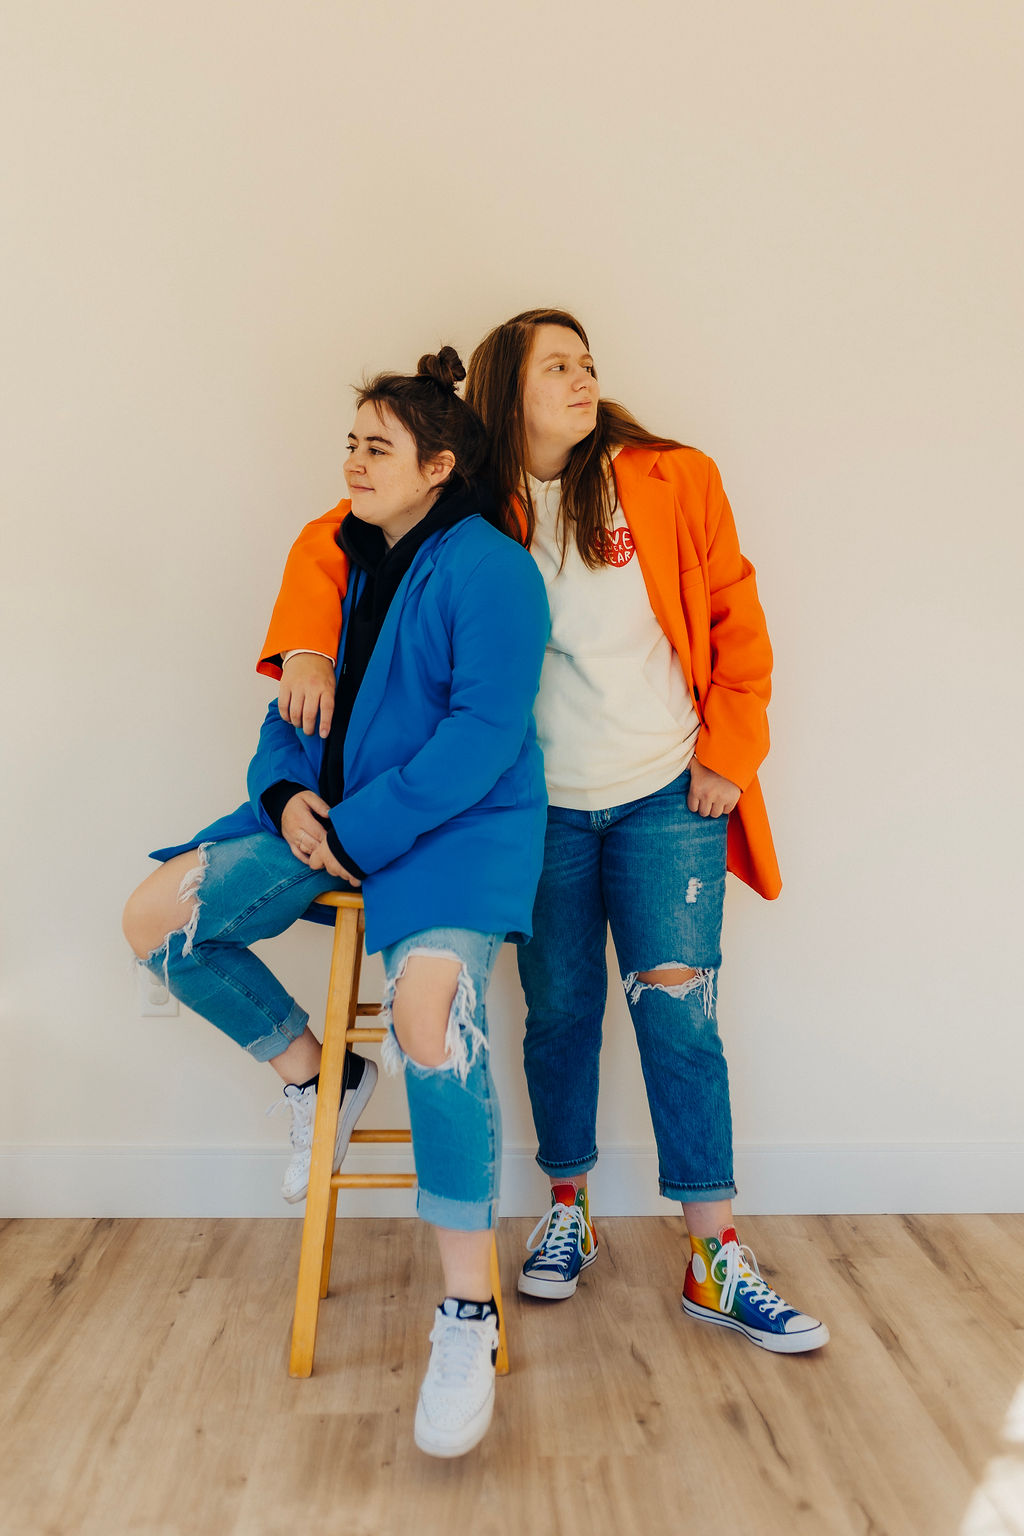 Two girls in jeans and blazers look opposite directions in the featured image for websites for creatives.